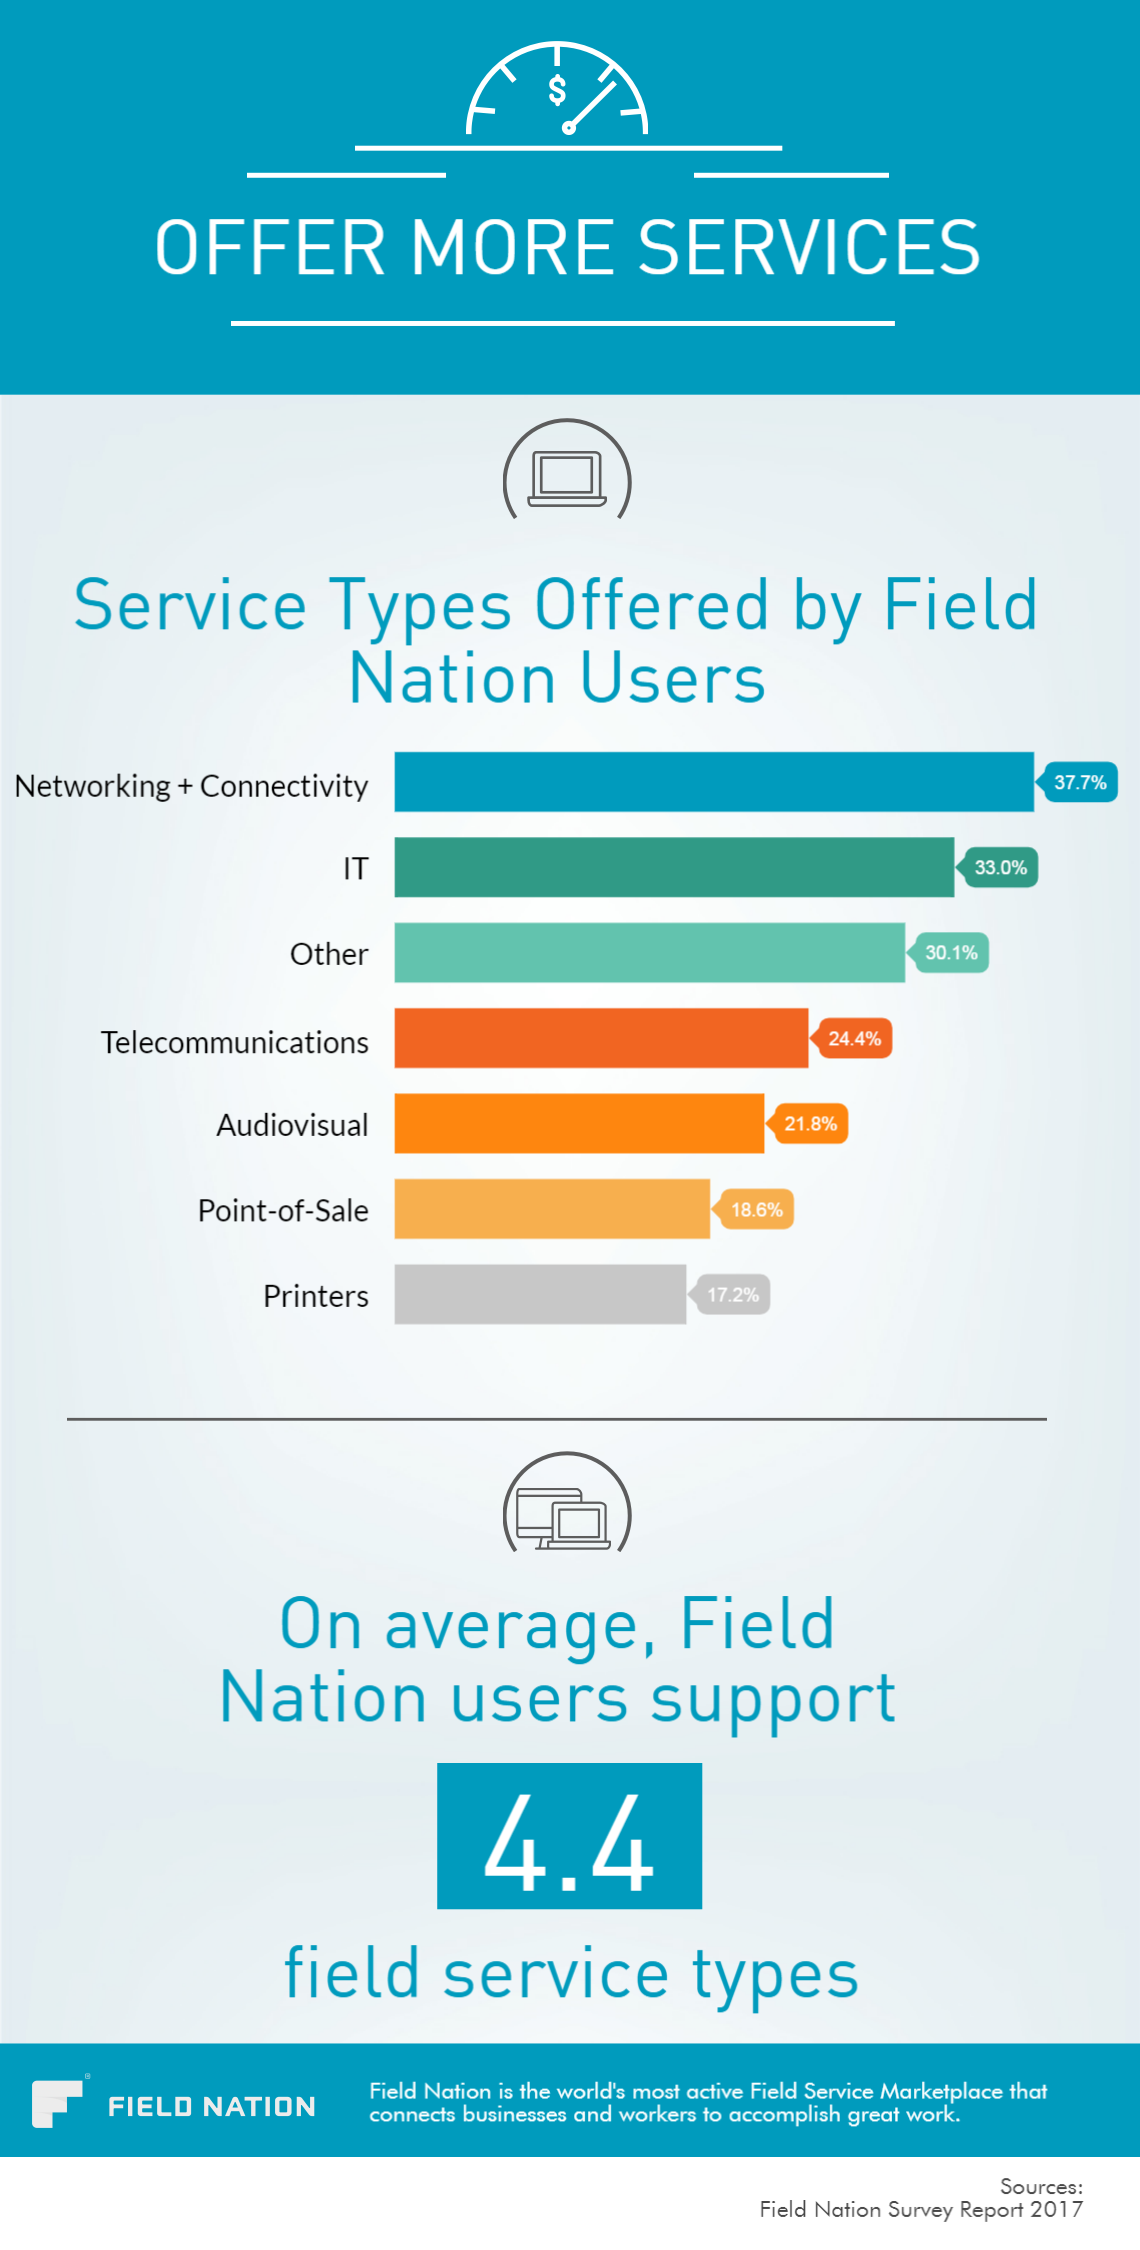 Service Types Offered by Field Nation Users